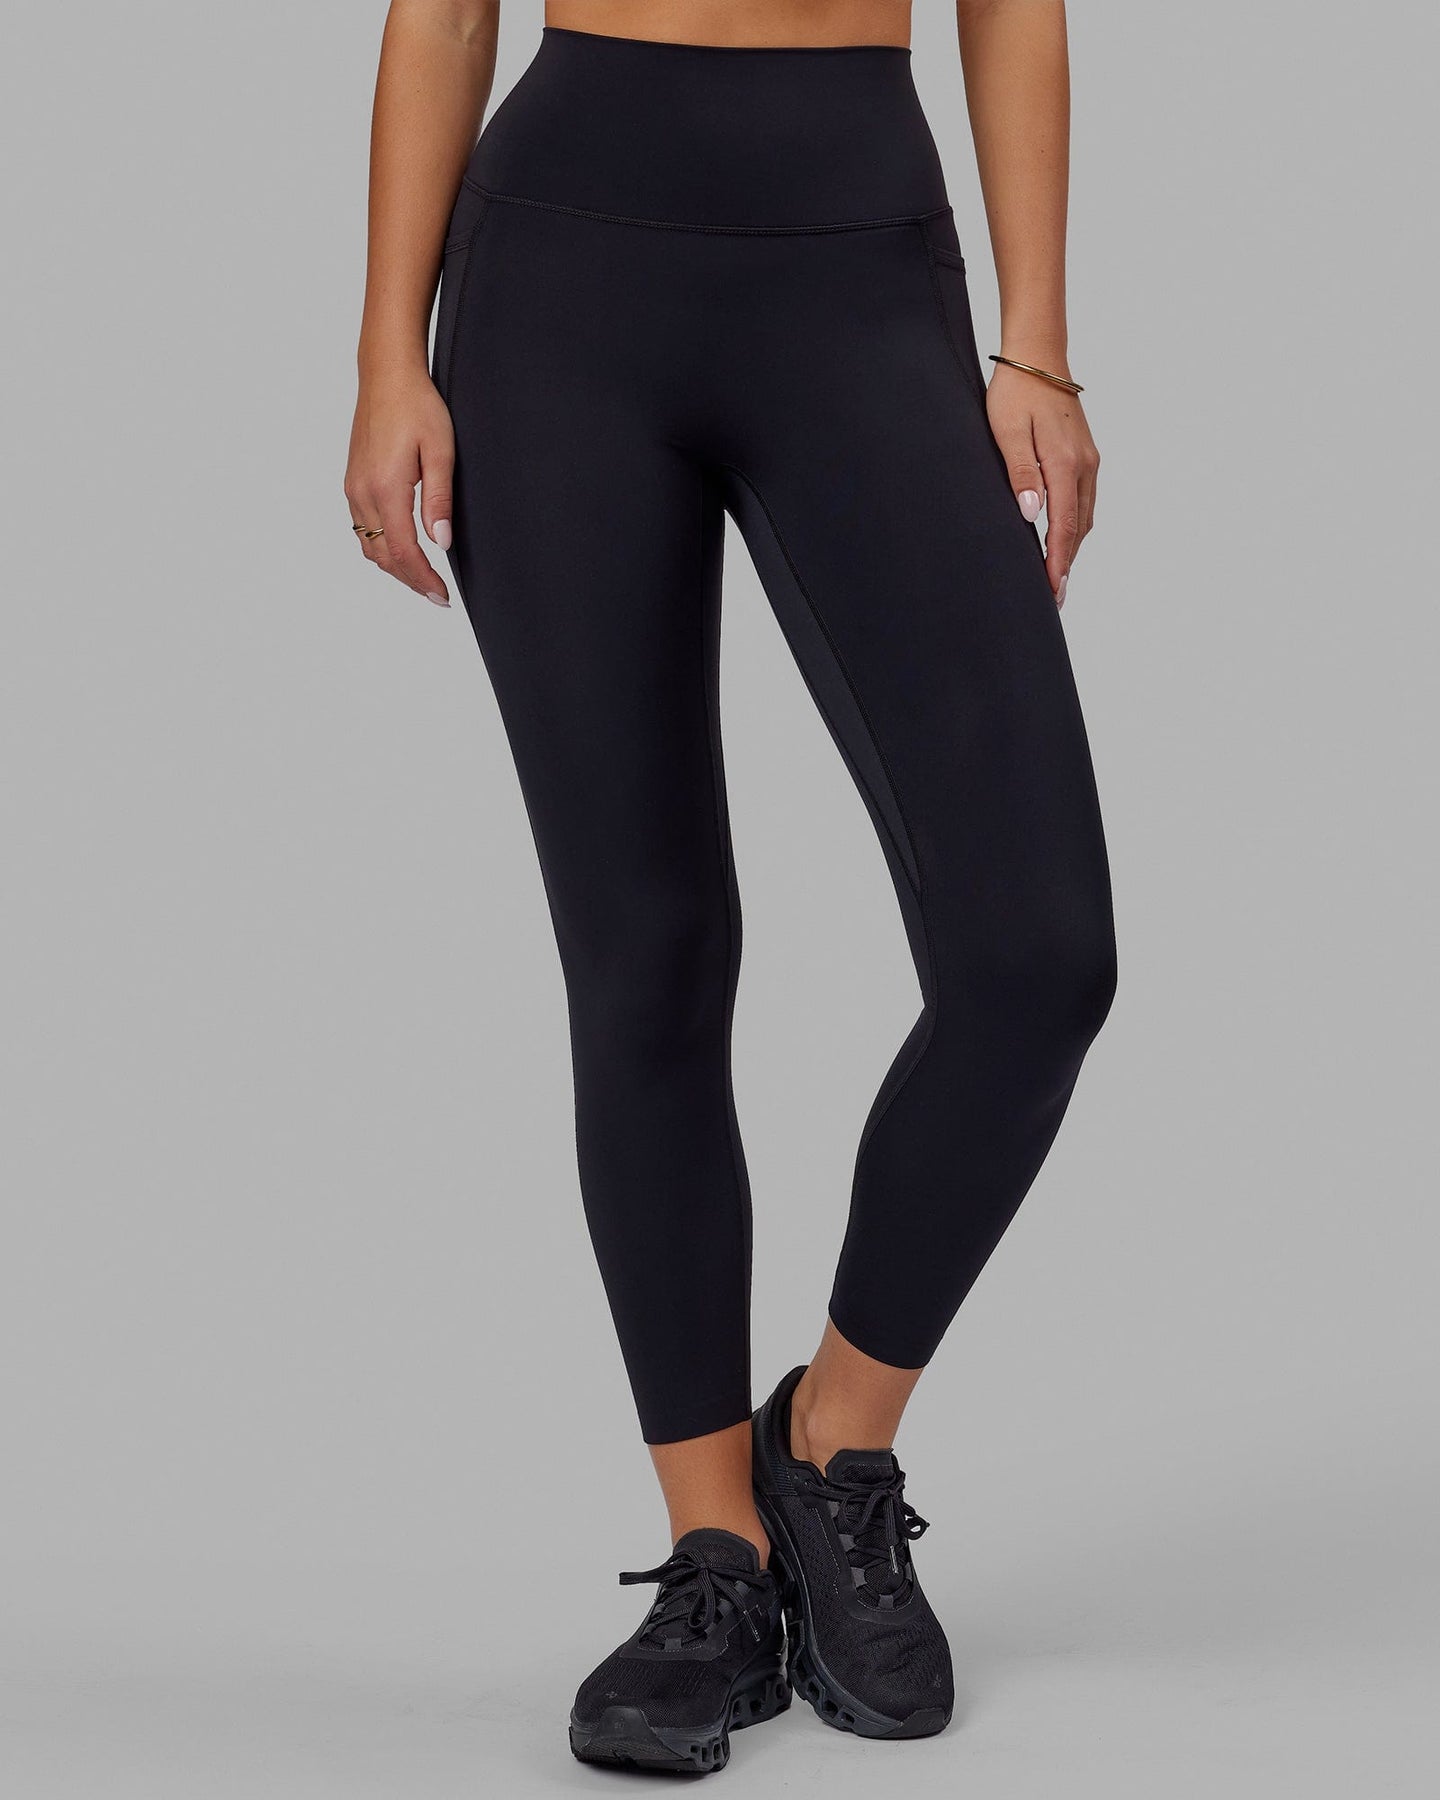 The Best Leggings for Women to Wear for Every Activity: Shop Styles from  Alo Yoga, lululemon, Spanx and More | Entertainment Tonight